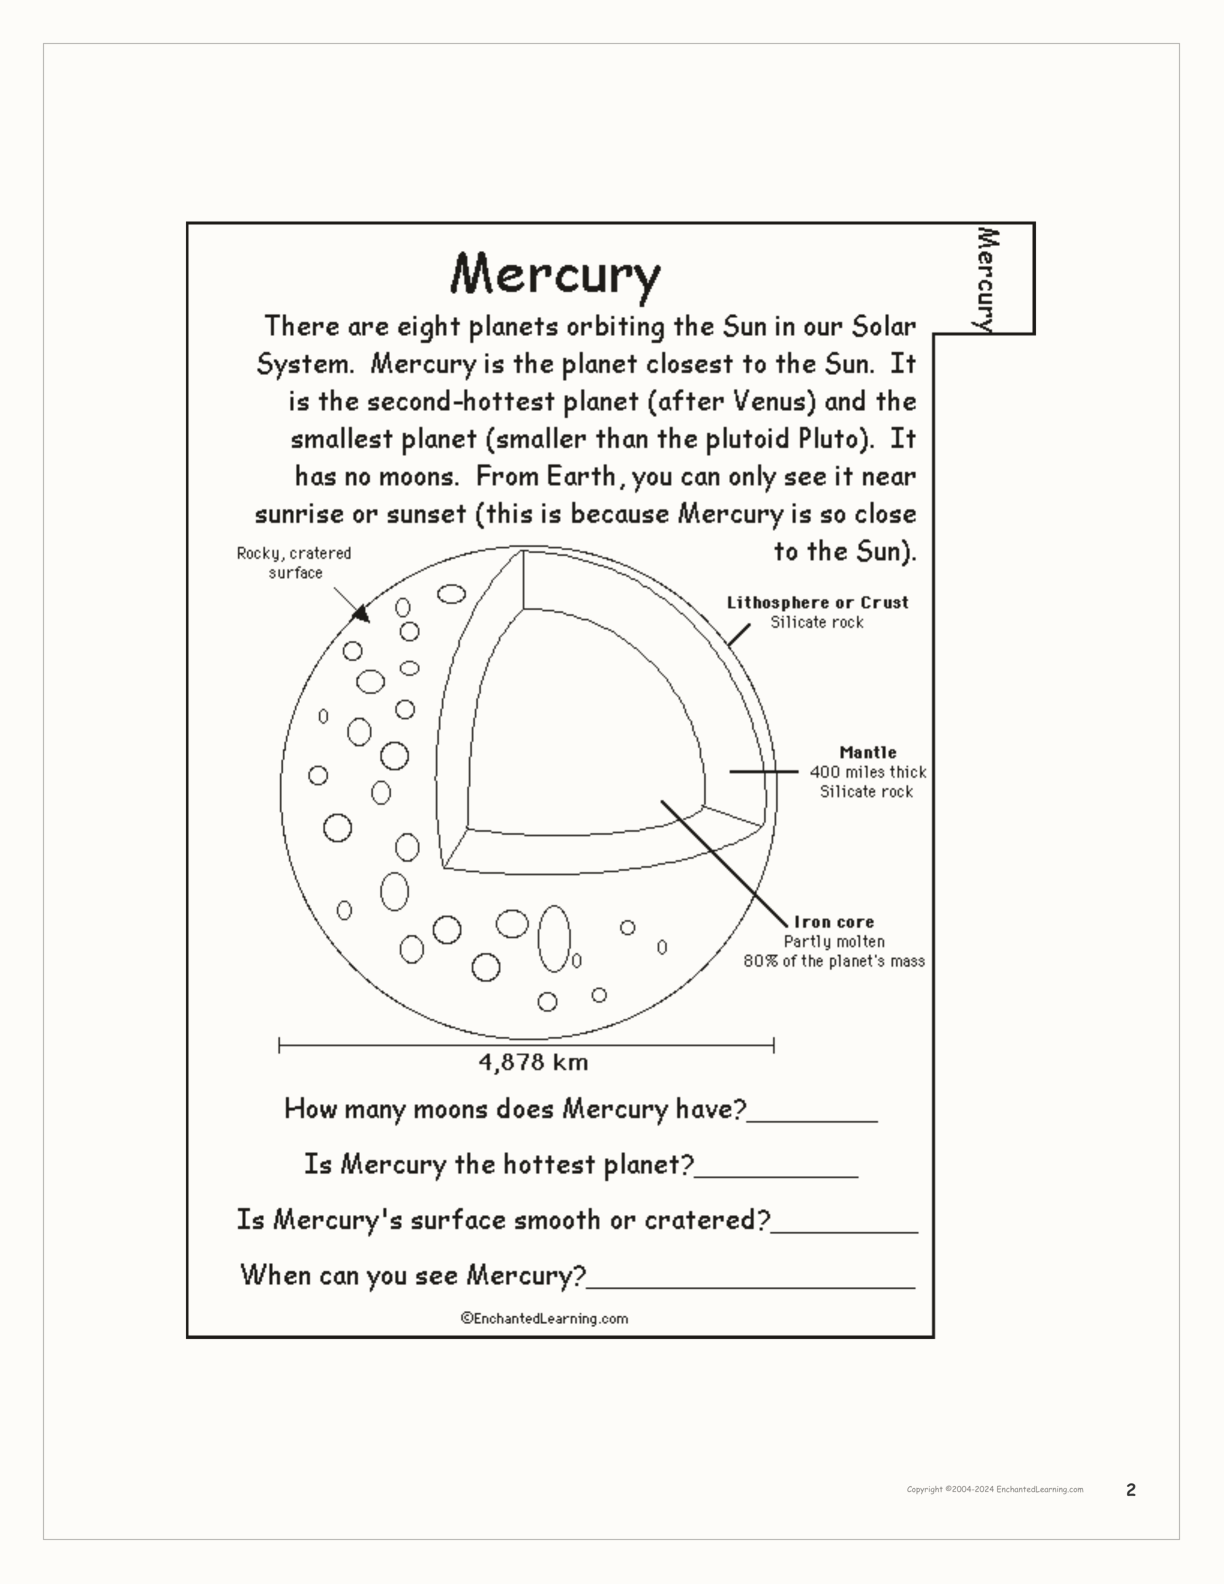 The Planets of our Solar System Book interactive printout page 2